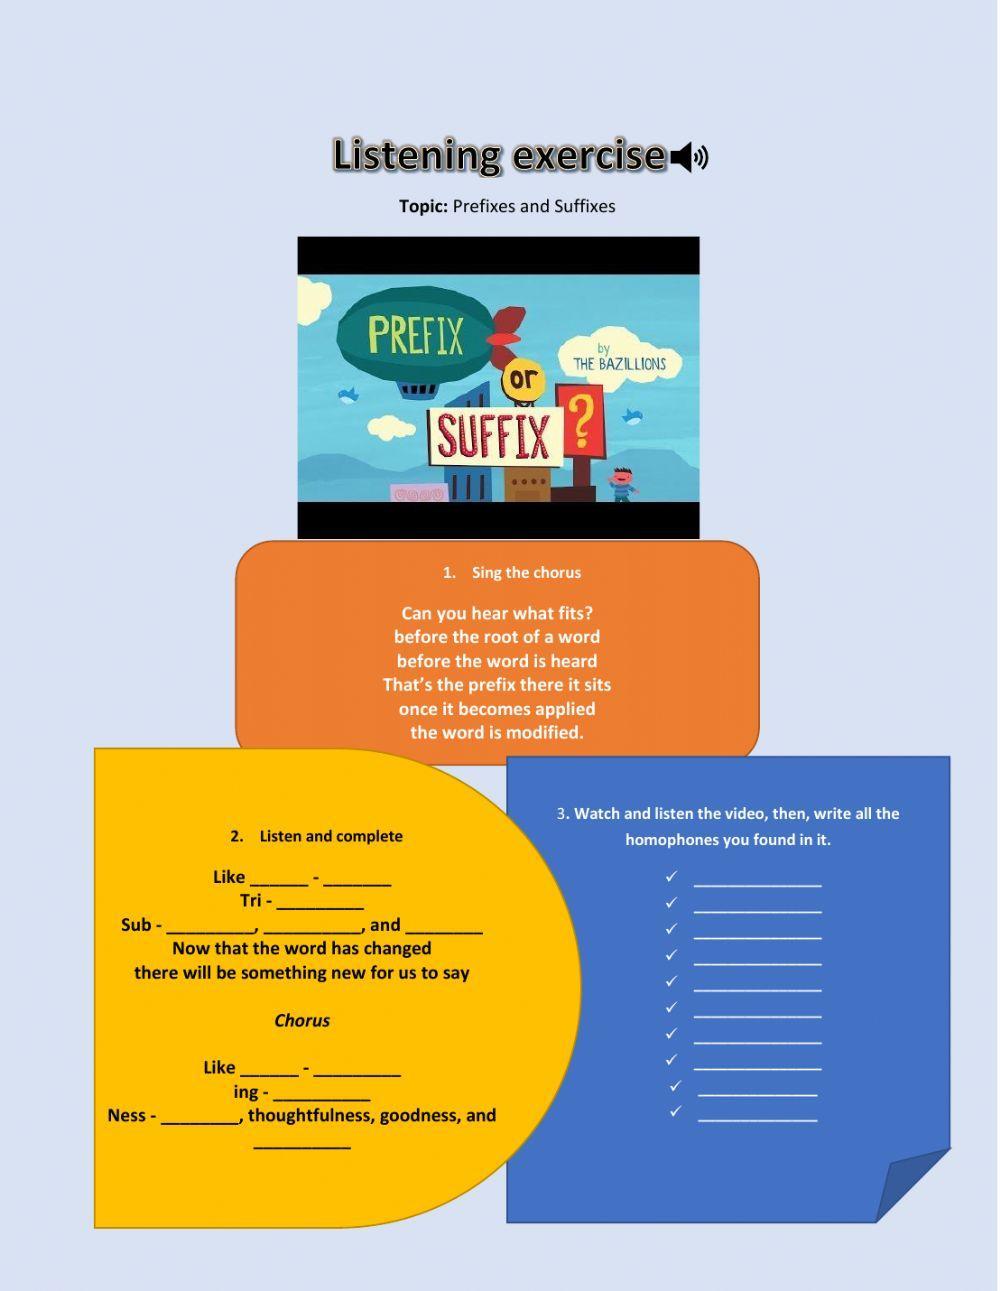 Prefixes and suffixes listening